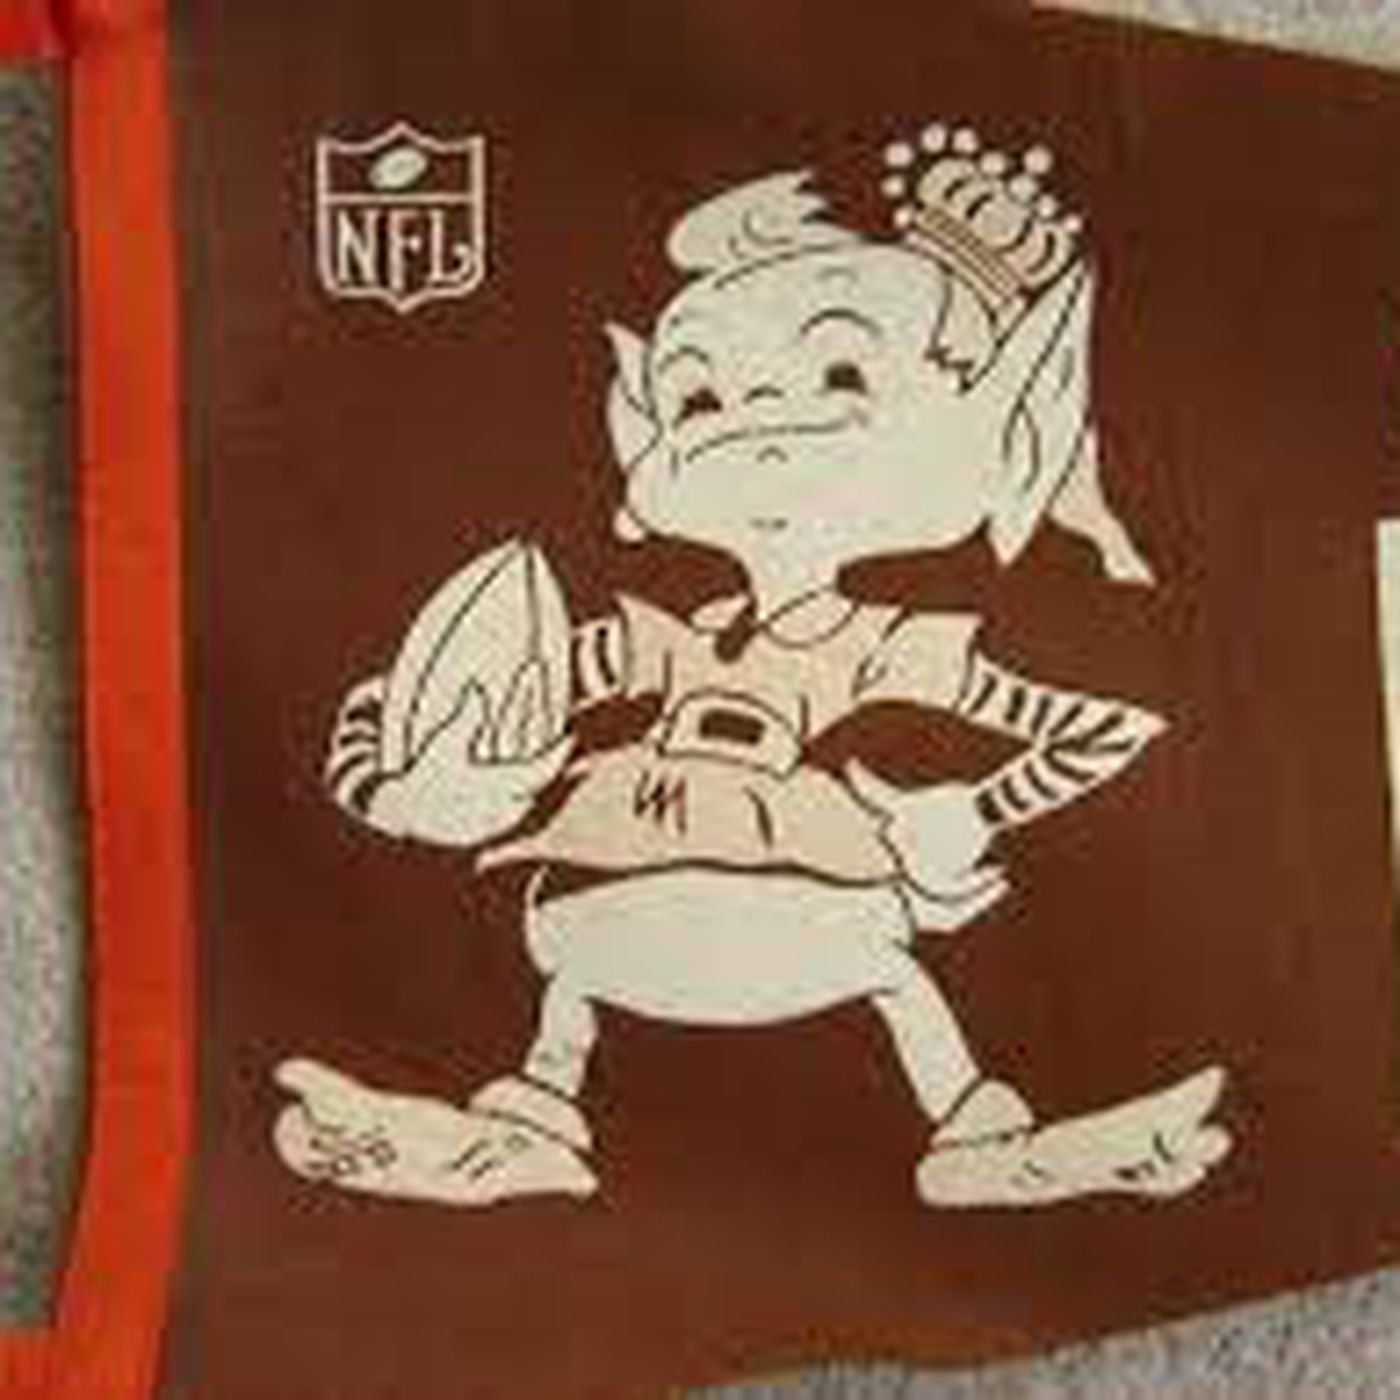 Brownie the Elf: Where did this originate, and does it belong in football? By Nature